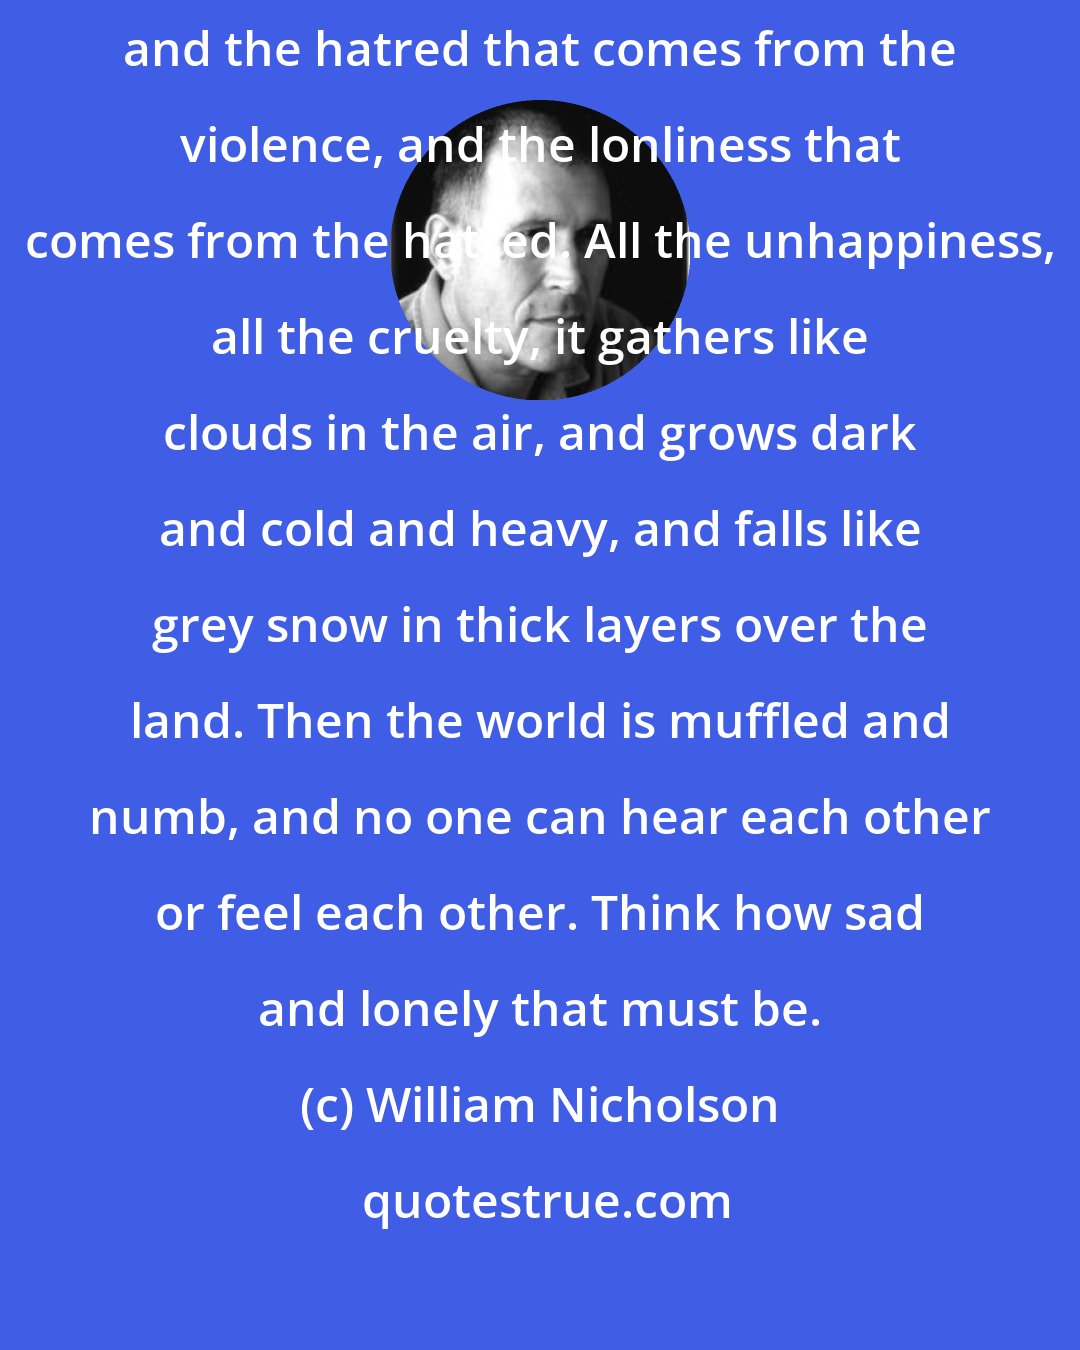 William Nicholson: All the fear in the world, and the violence that comes from the fear, and the hatred that comes from the violence, and the lonliness that comes from the hatred. All the unhappiness, all the cruelty, it gathers like clouds in the air, and grows dark and cold and heavy, and falls like grey snow in thick layers over the land. Then the world is muffled and numb, and no one can hear each other or feel each other. Think how sad and lonely that must be.